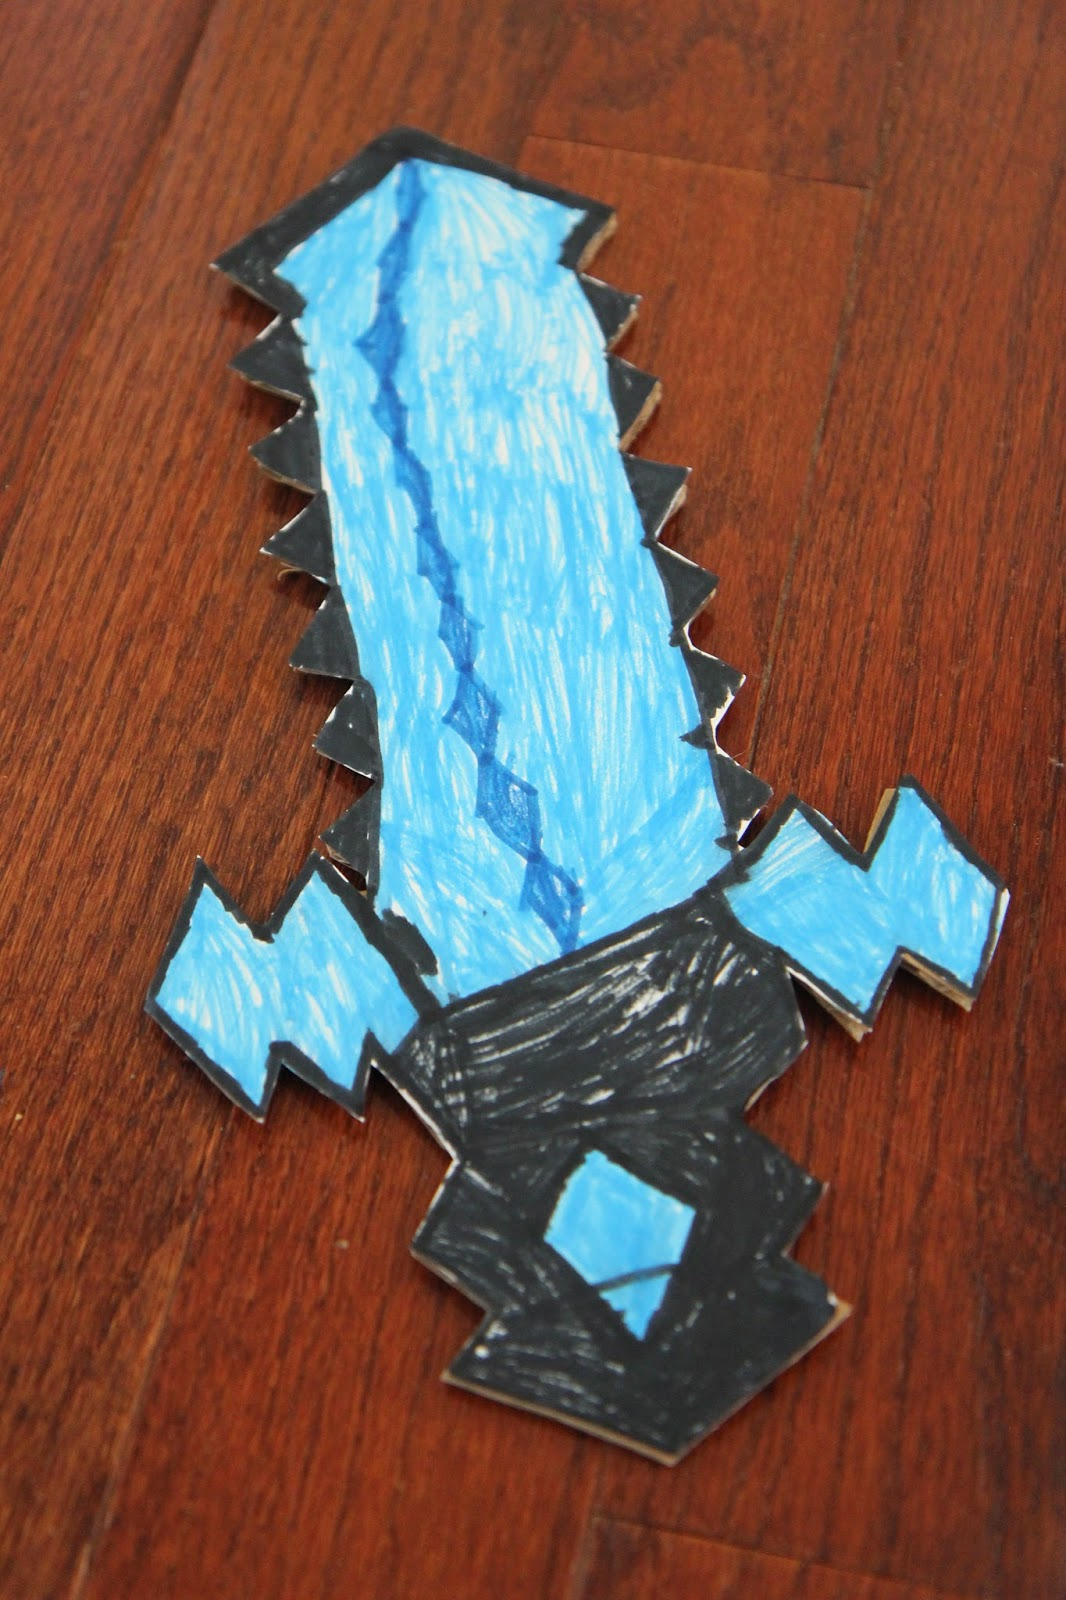 How To Make A Origami Minecraft Sword Toddler Approved Diy Cardboard Minecraft Sword Free Printable